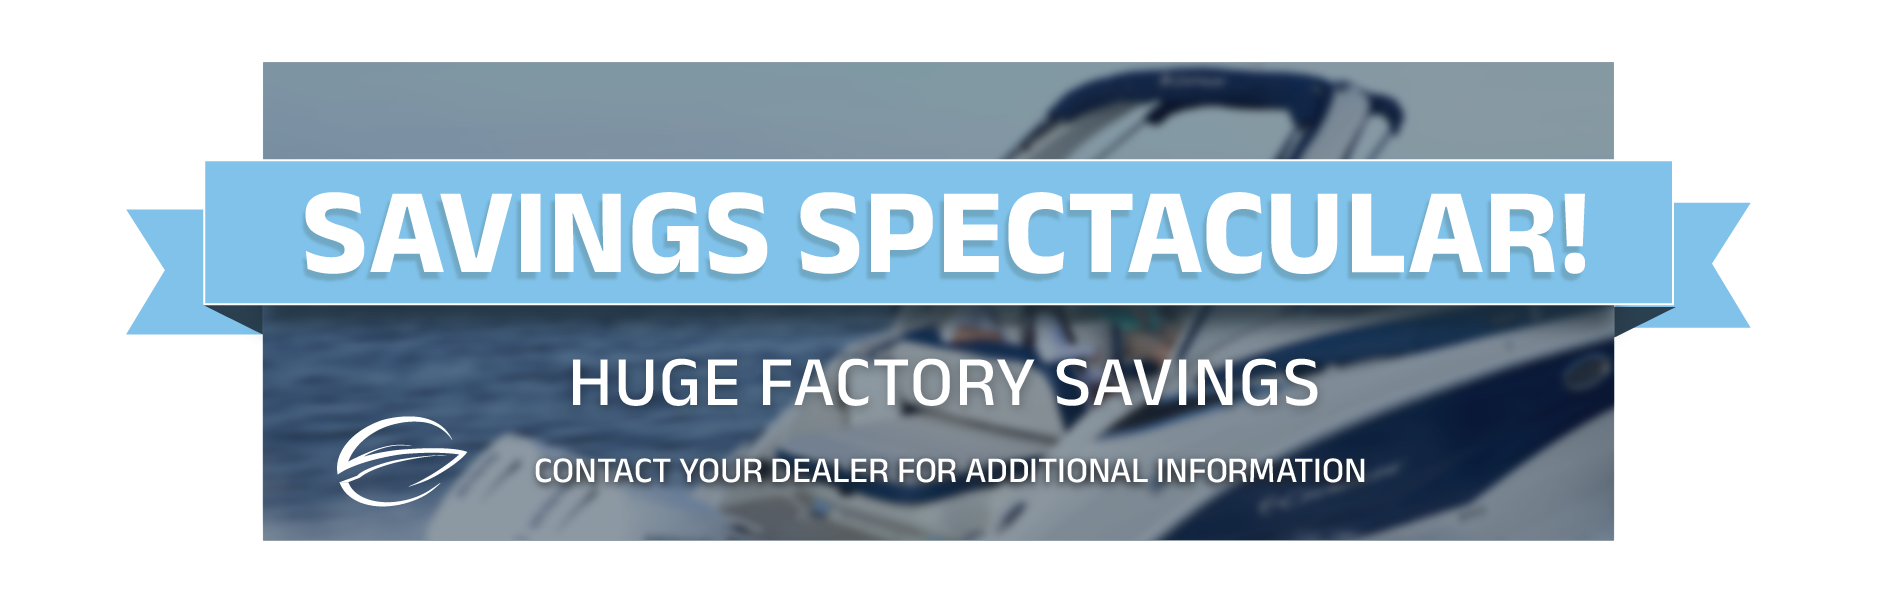 Savings Spectacular! Huge Factory Savings. Contact your dealer for additional information.